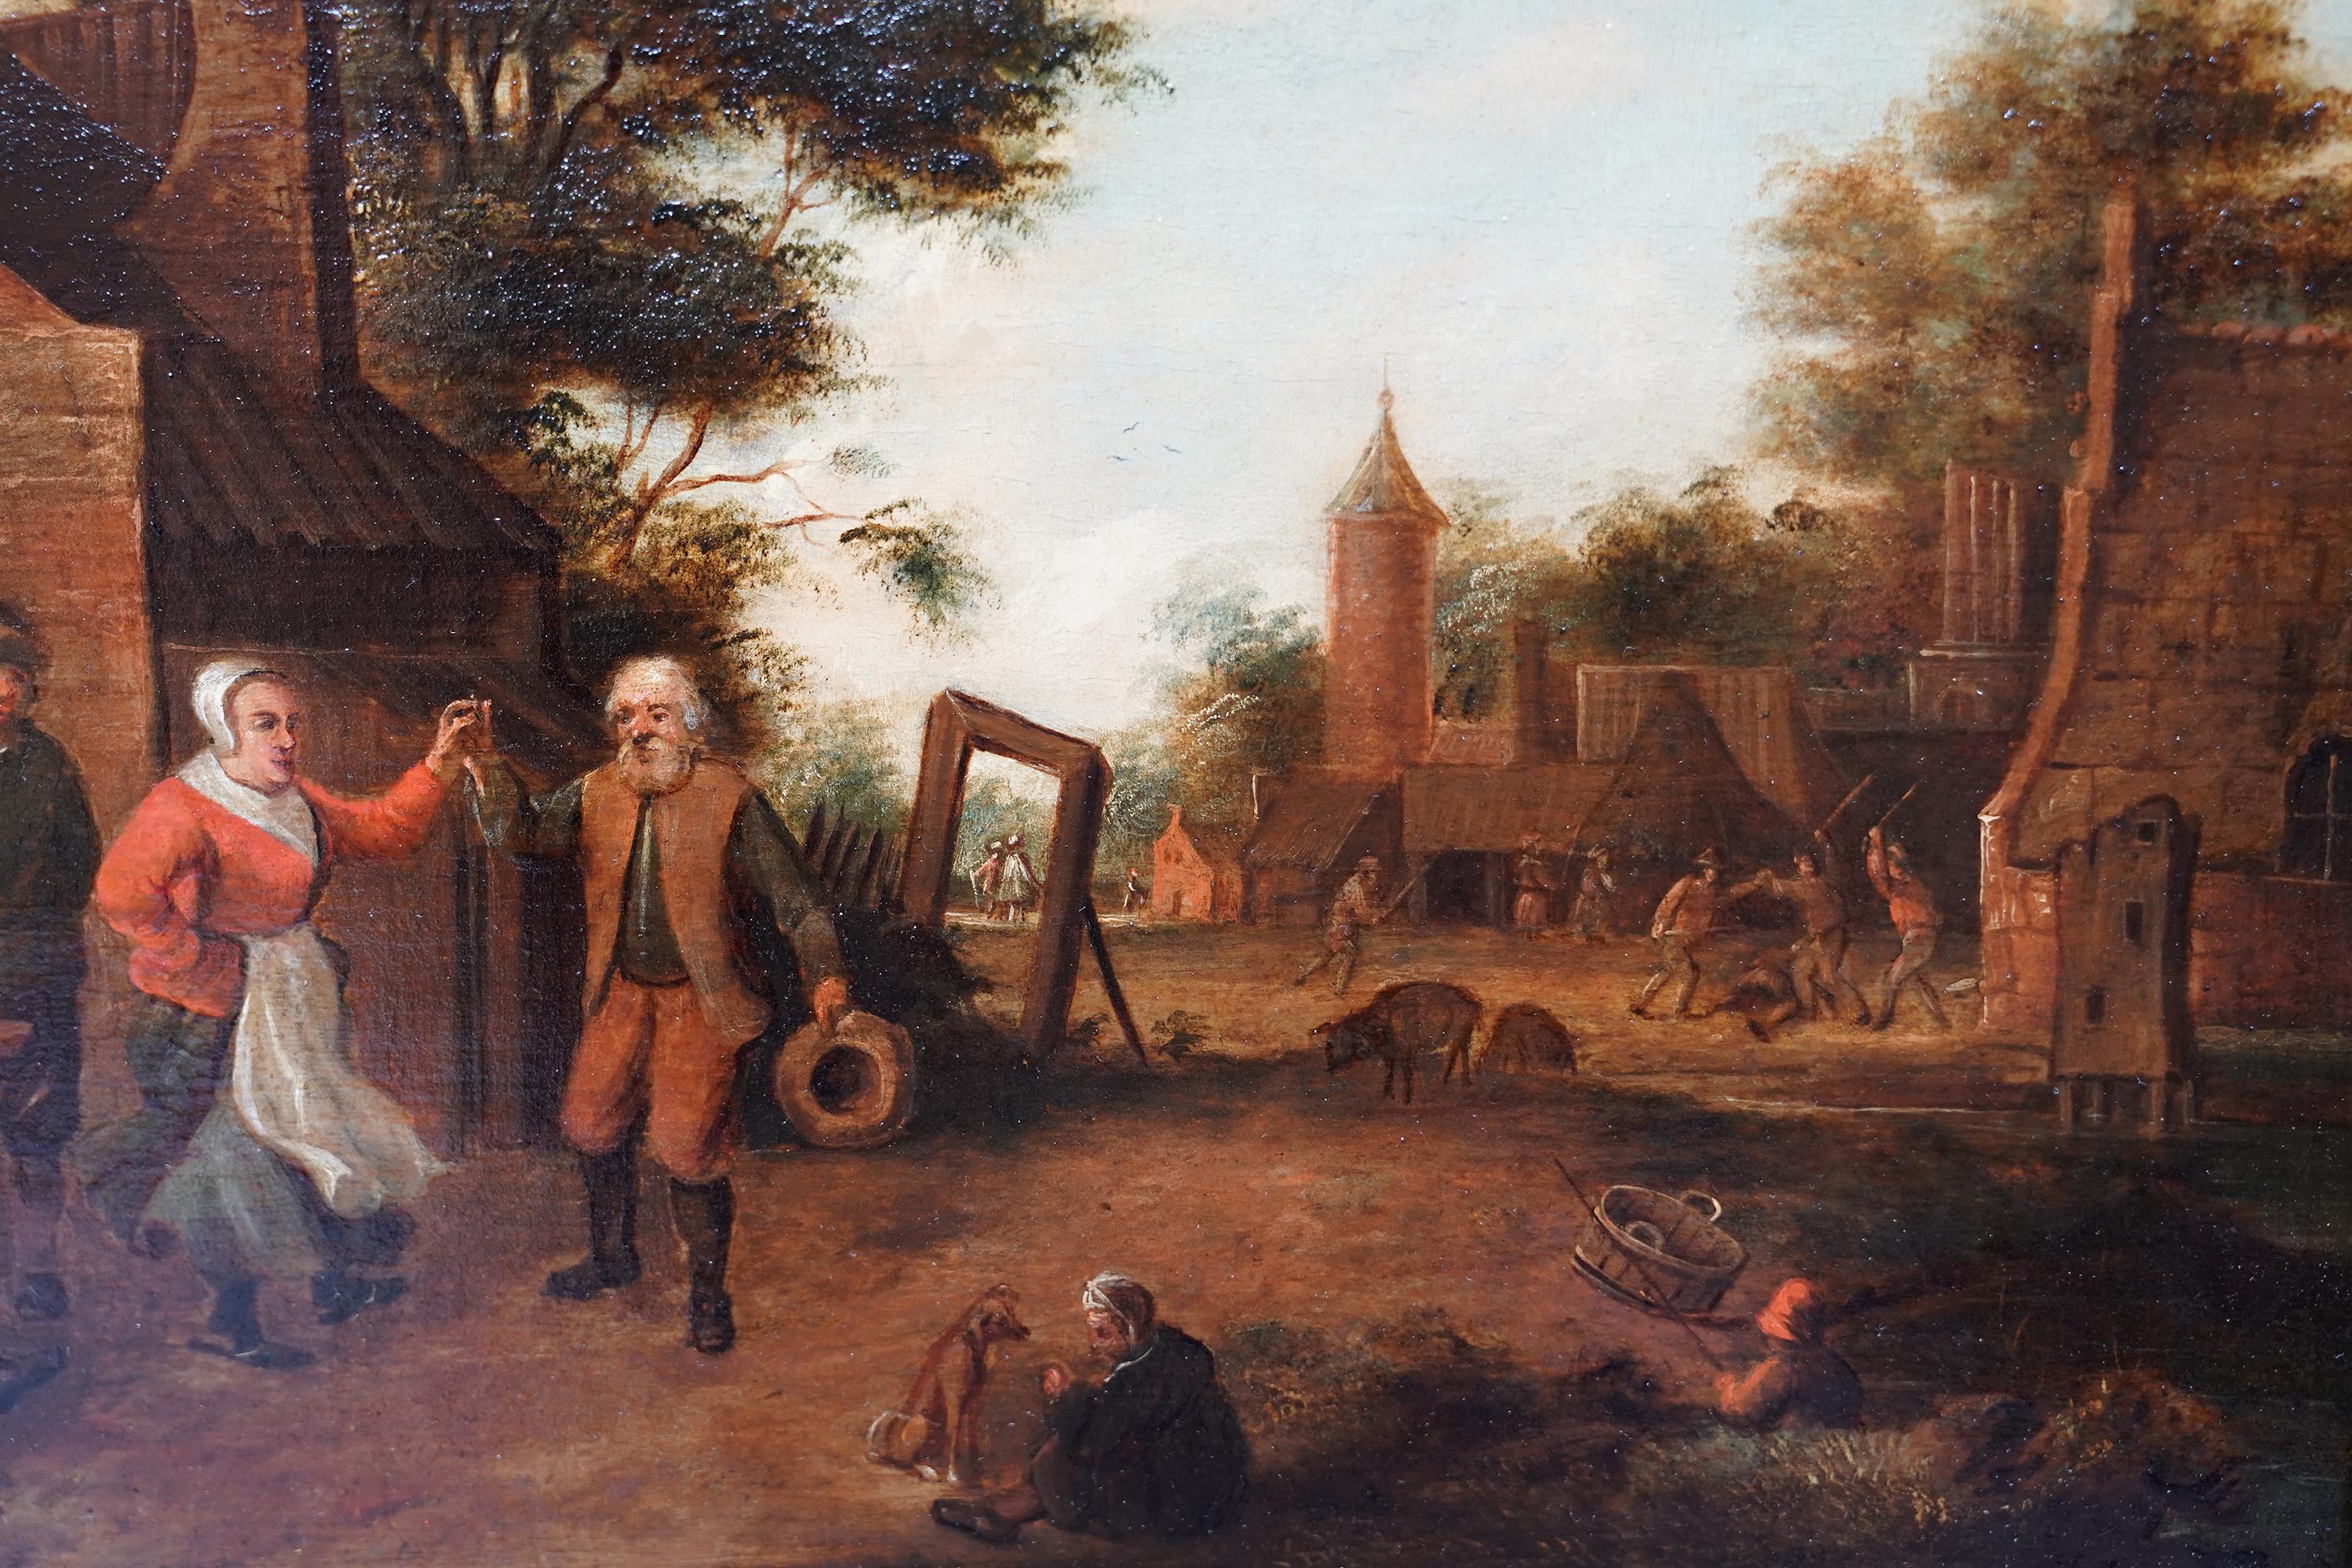 This fantastic Flemish 17th century Old Master oil painting is by Thomas Van Apshoven. It was painted circa 1650 and depicts a village with figures outside a tavern, eating, drinking and dancing. Beyond are more dwellings, villagers and animals, all